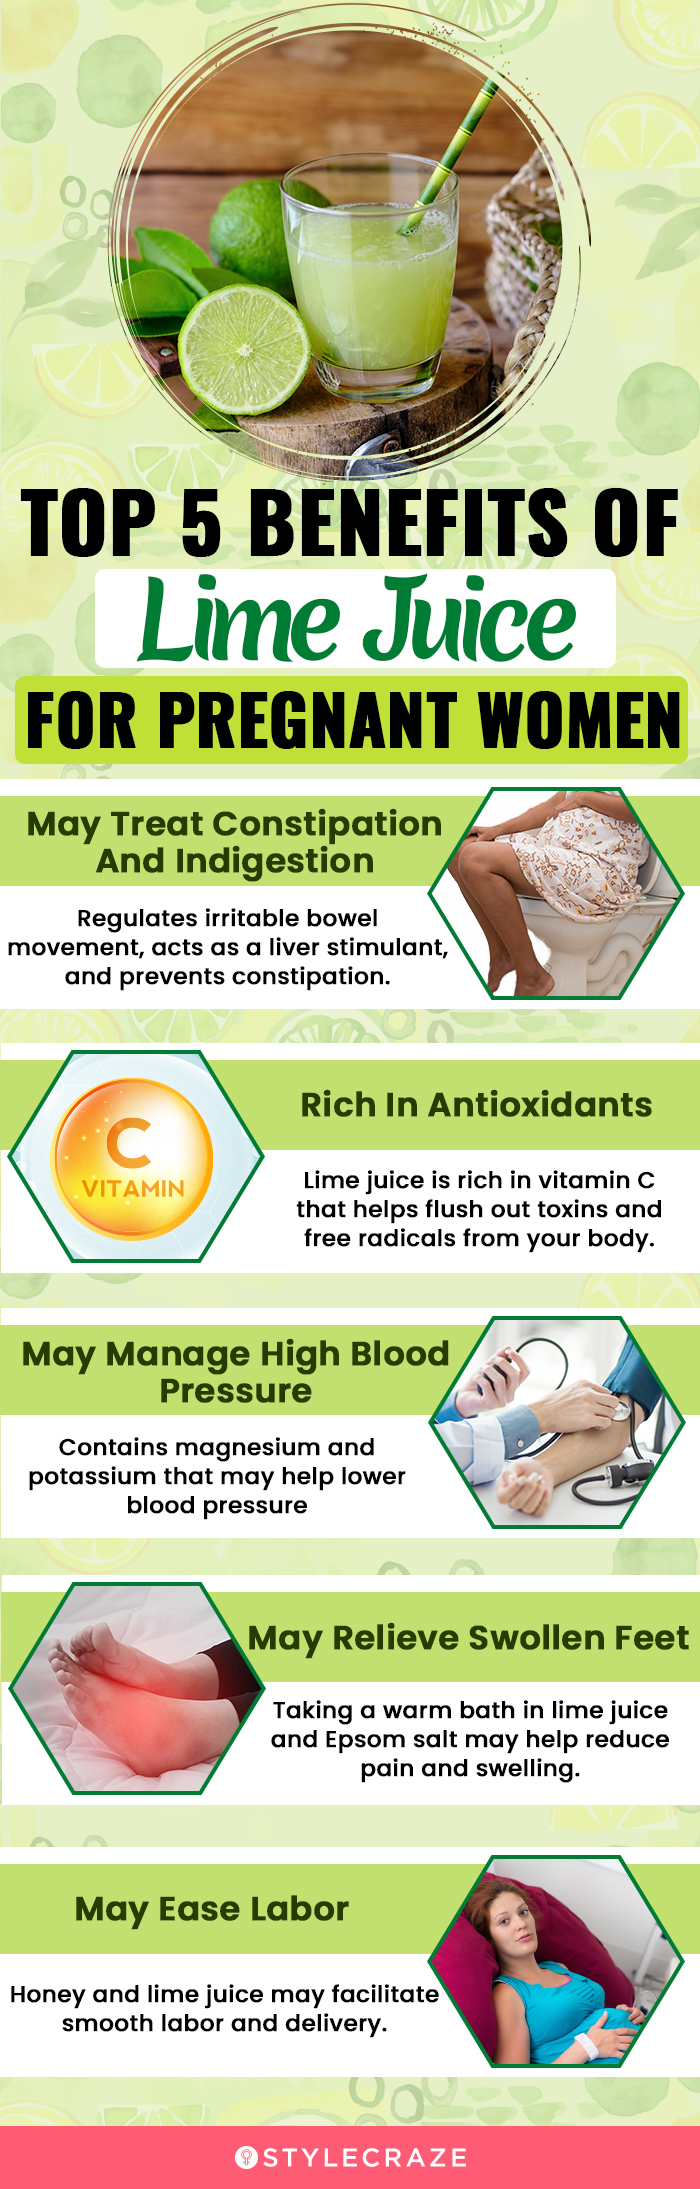 top 5 benefits of lime juice for pregnant women [infographic]